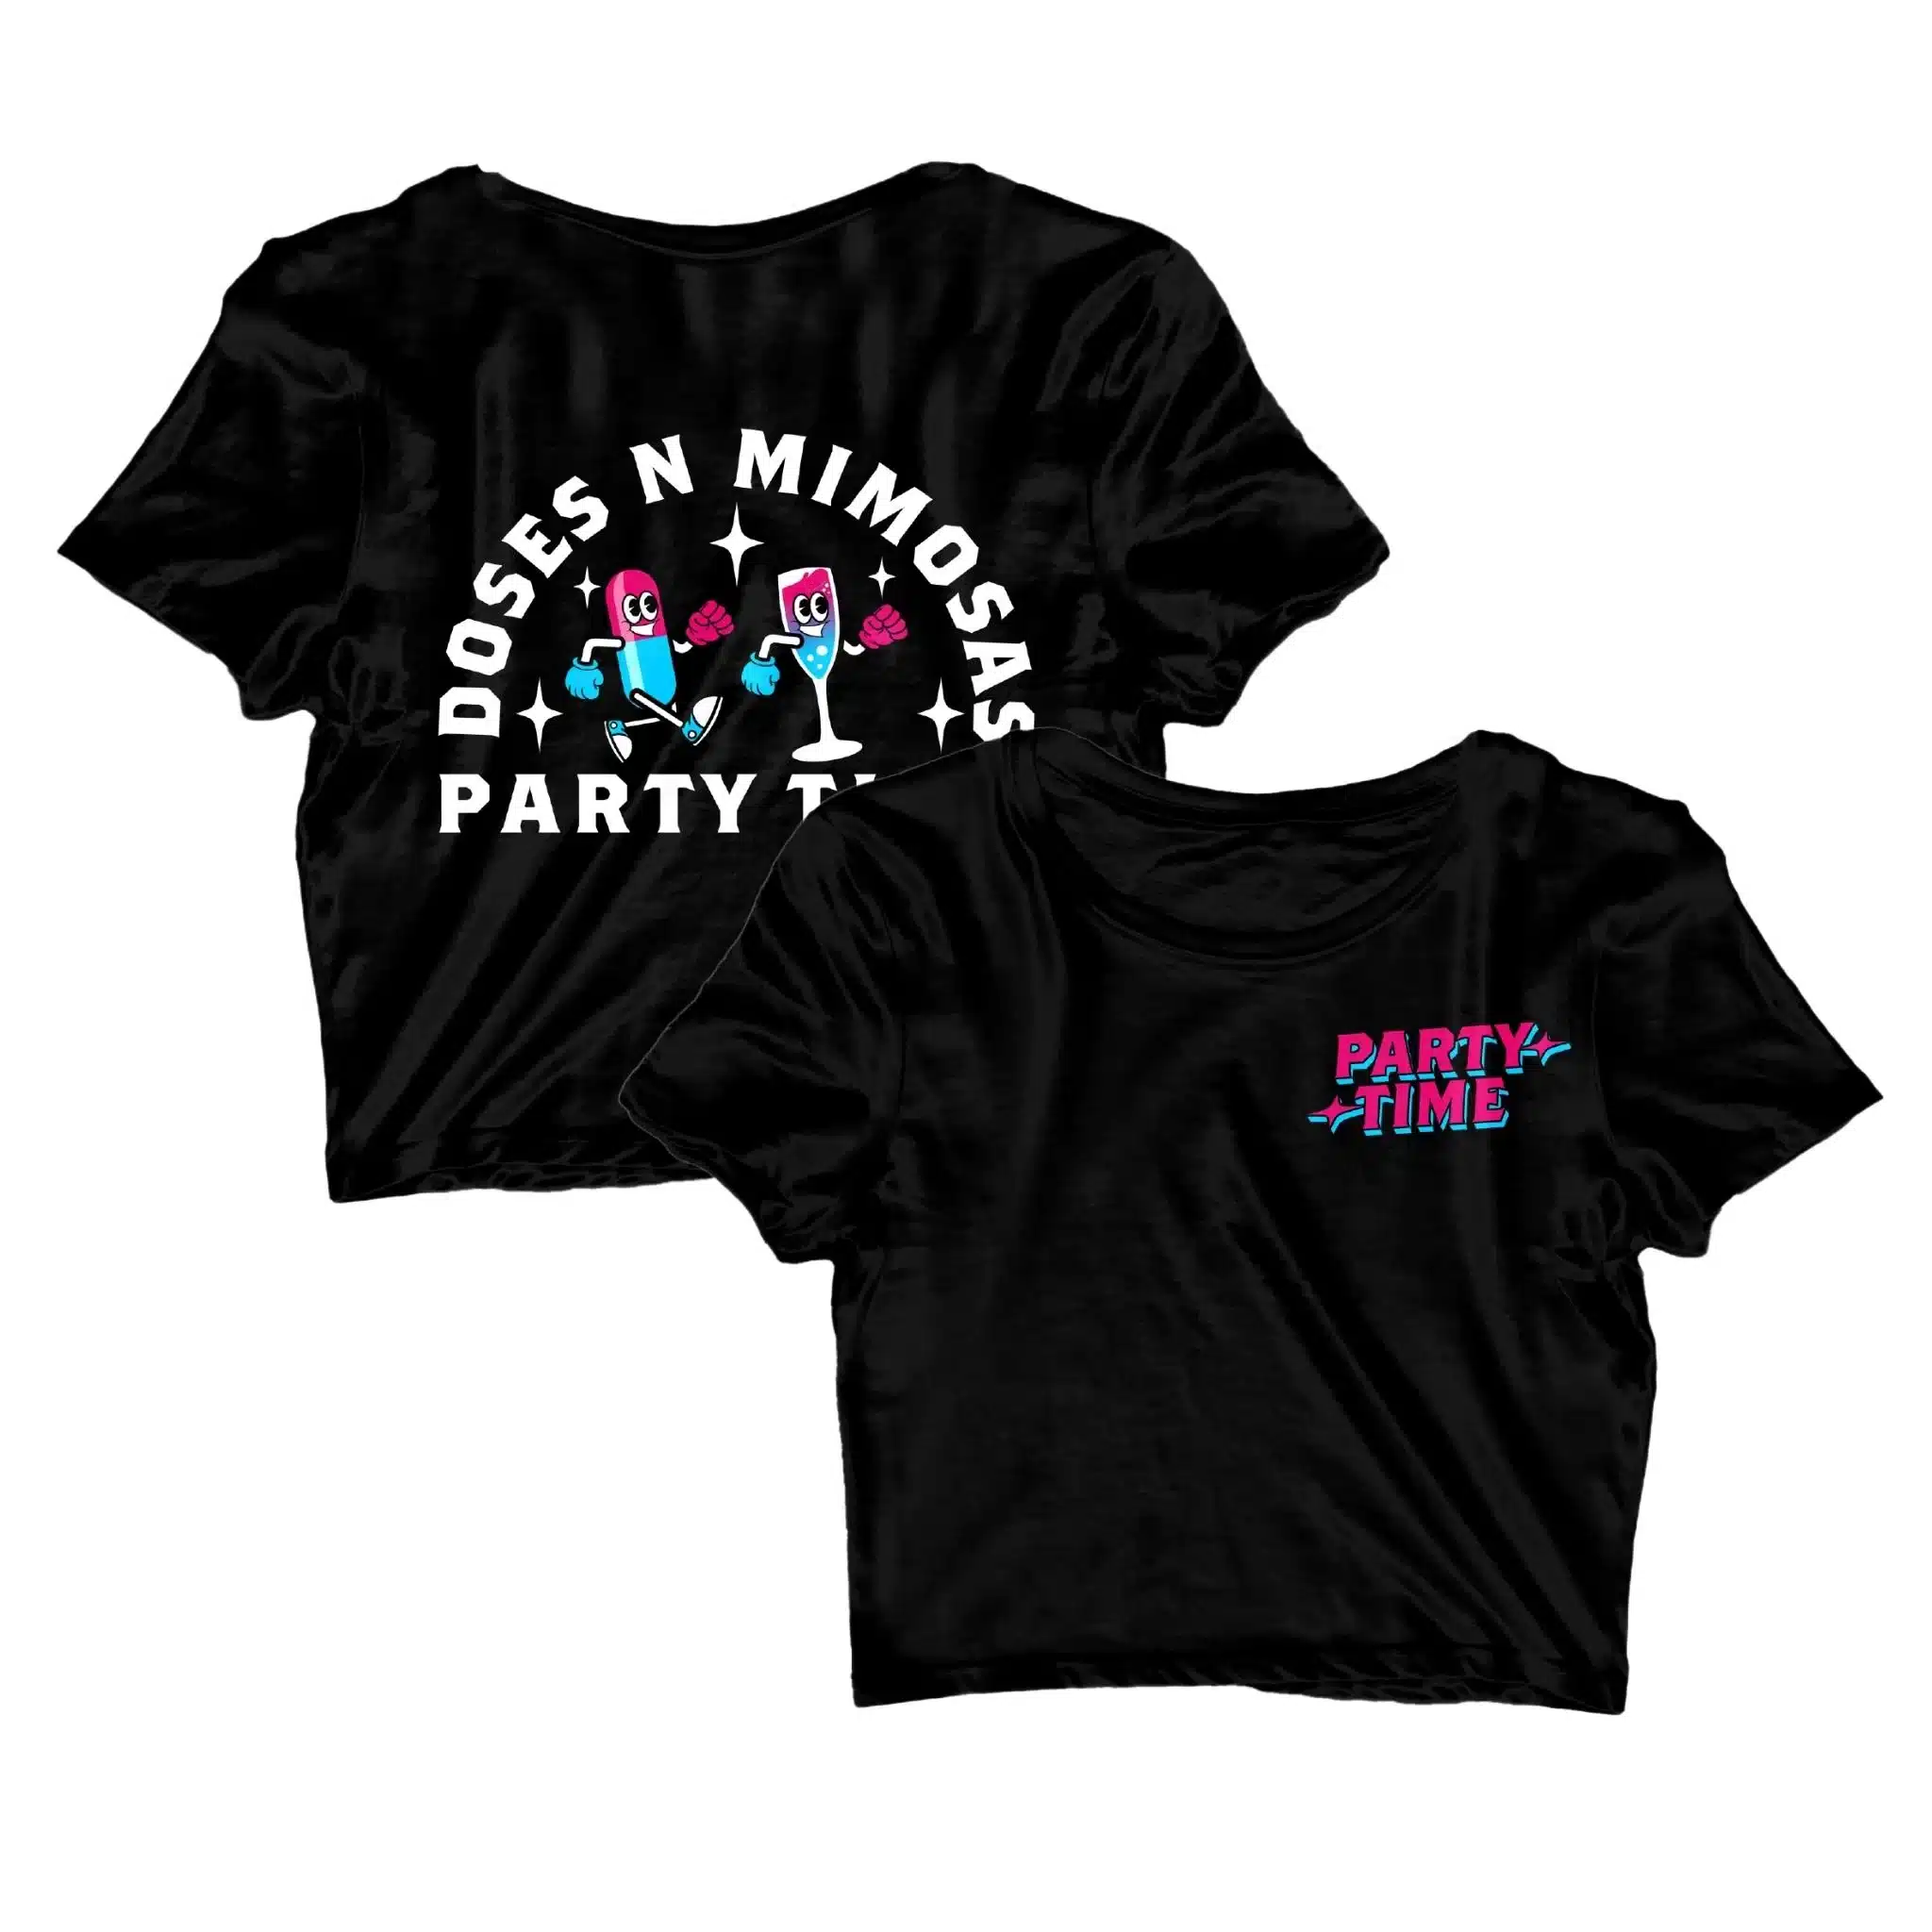 Party Time Crop Top by Party Wolf Clothing